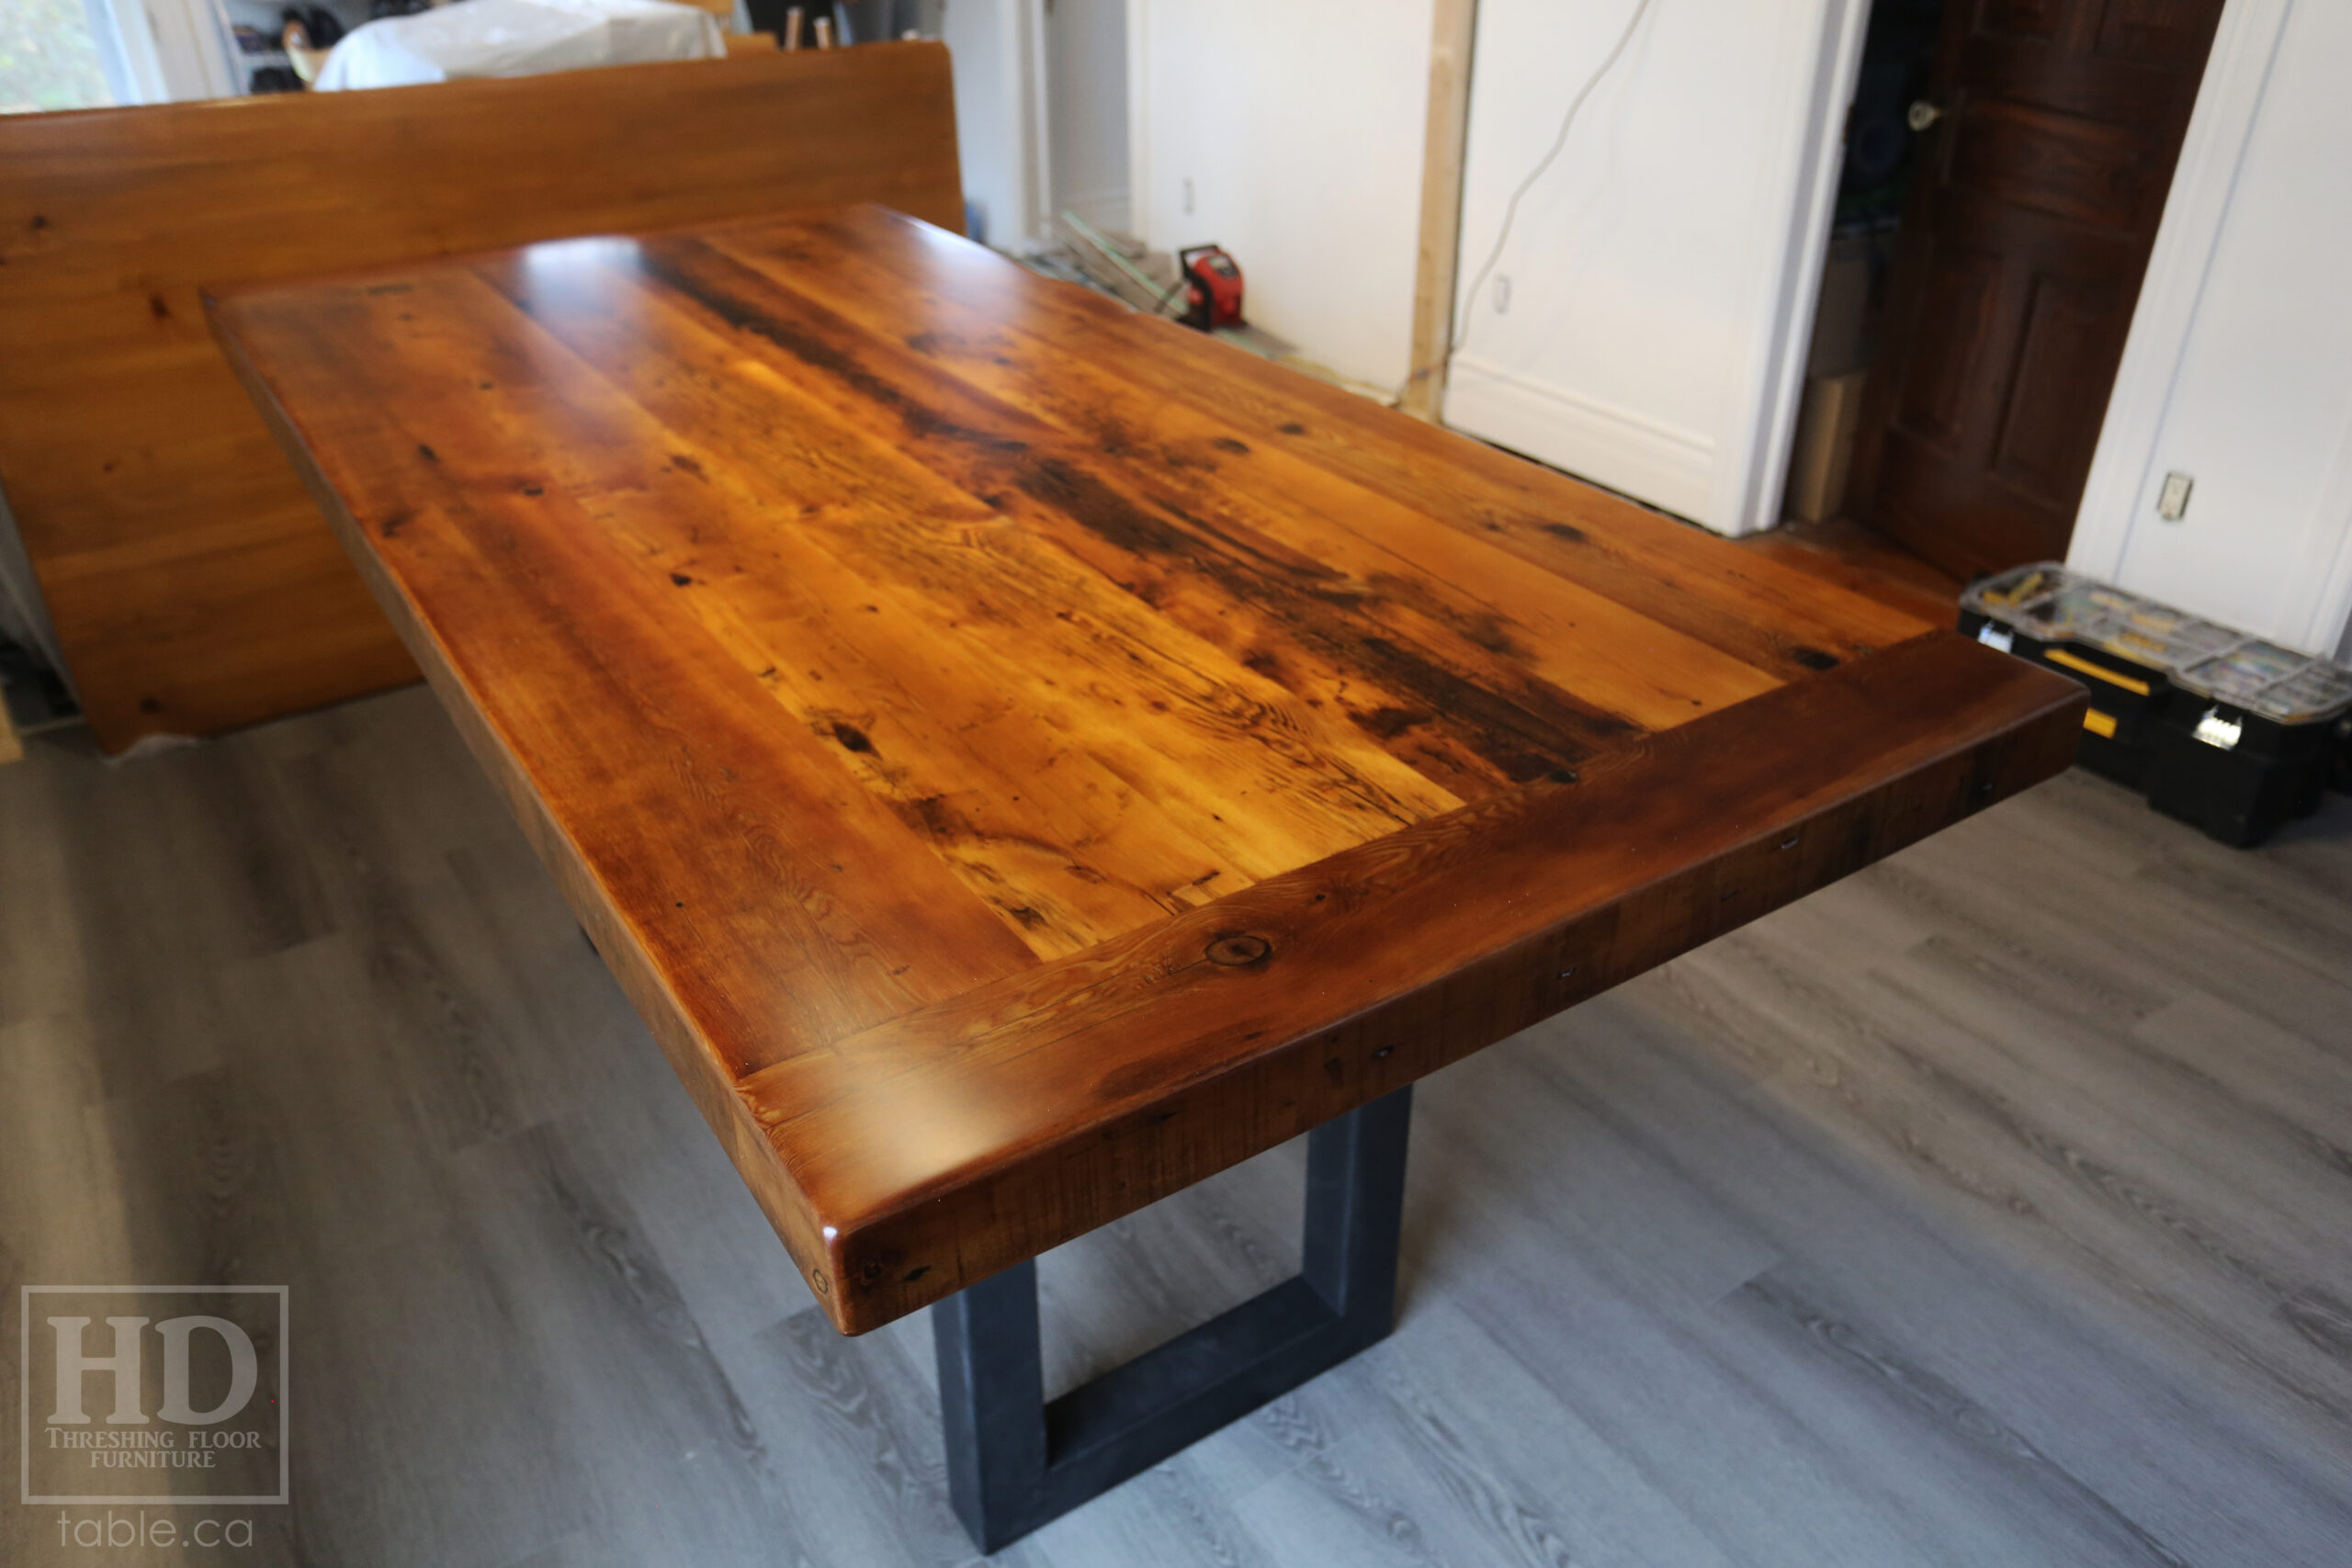 7' Reclaimed Ontario Barnwood Table we made for a Goderich home - 39" wide - 36" height - 3" Joist Material Top Option - Metal U Shaped Matte Black Base - Old Growth Hemlock Threshing Floor Construction - Original edges & distressing maintained - Premium epoxy + satin polyurethane finish - Two 18" Leaves - www.table.ca